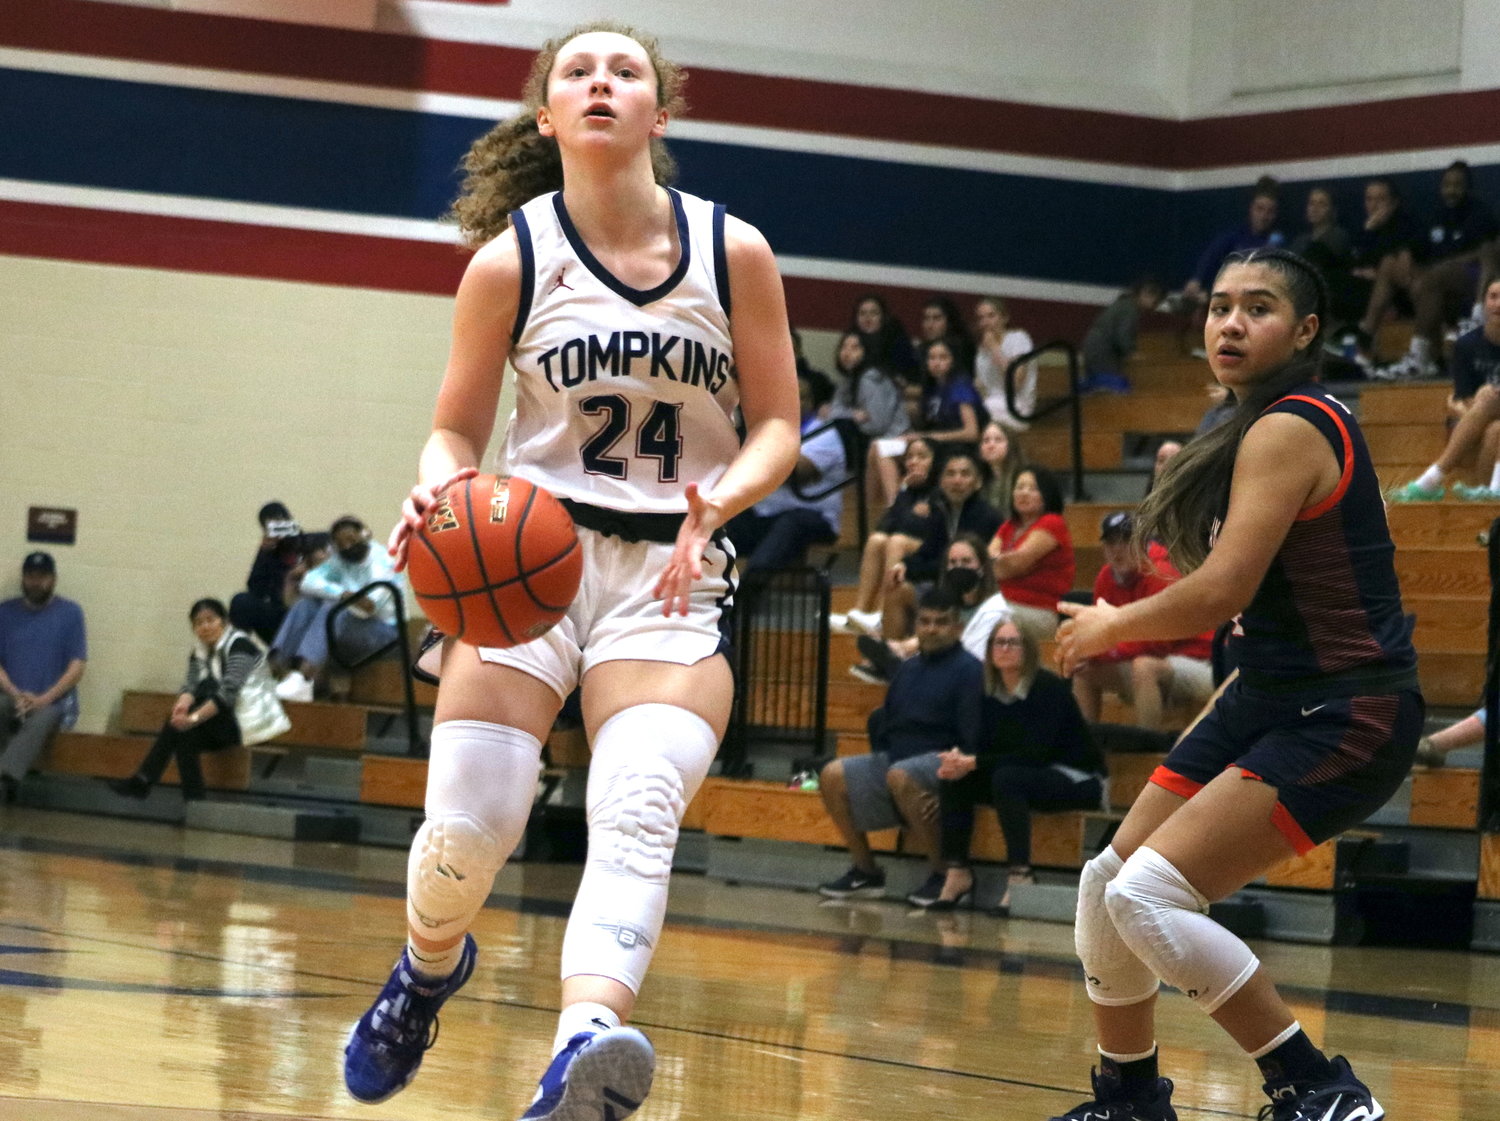 Gabby Panter dribbles past a defender during Tuesday’s District 19-6A game between Tompkins and Seven Lakes at the Tompkins gym.